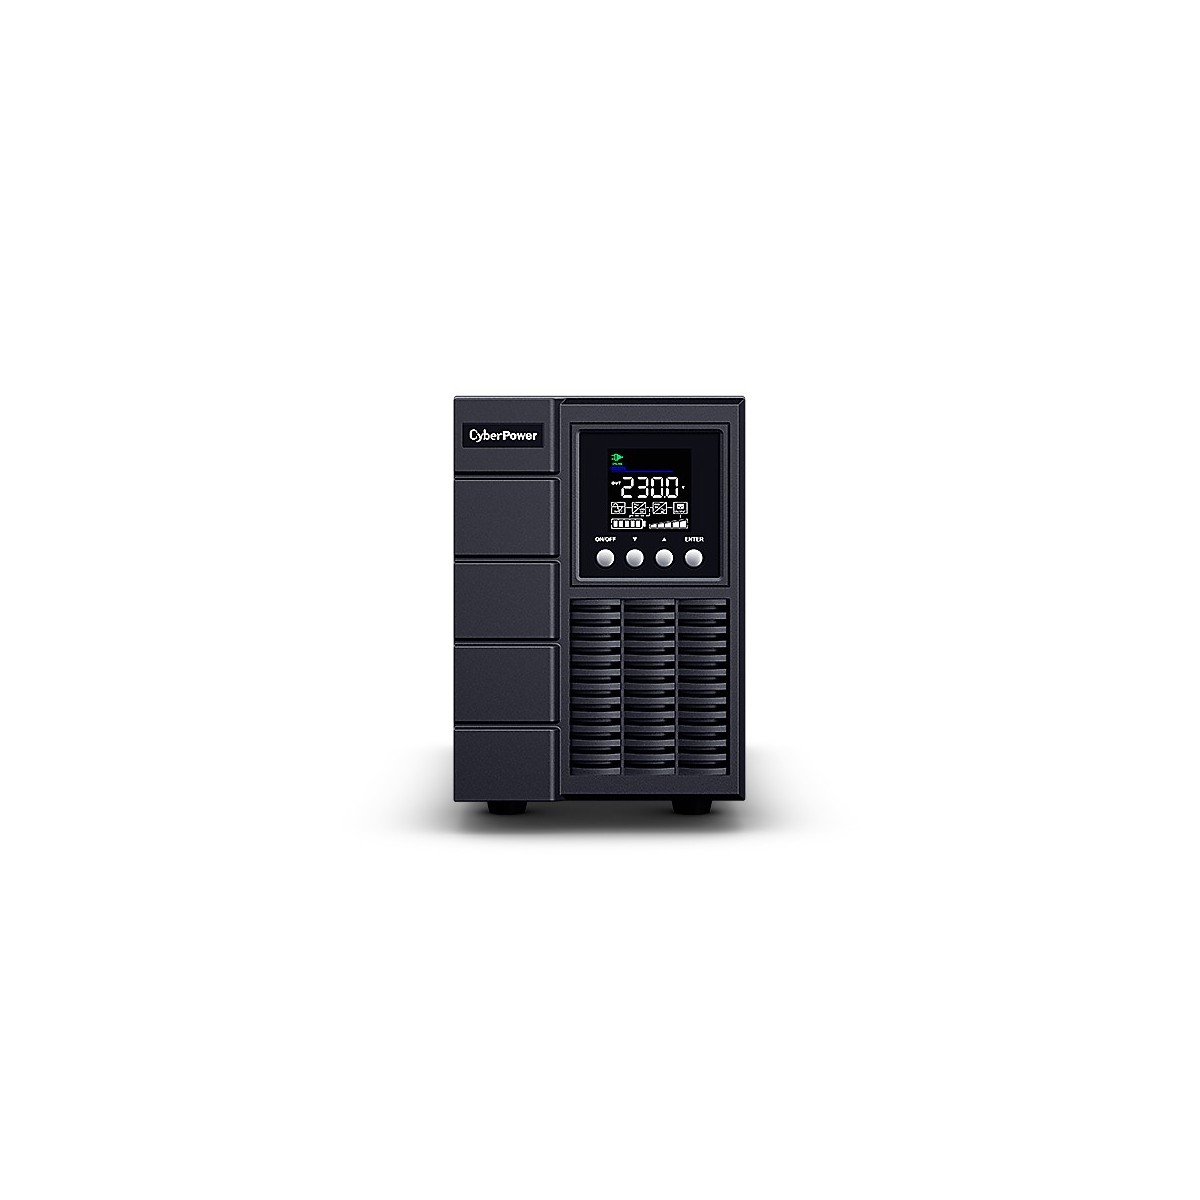 CyberPower Systems USV OLS Tower-Serie 2000VA/1800W On-Line LCD USB/RS232 - (Offline) UPS - Power Saving Mode